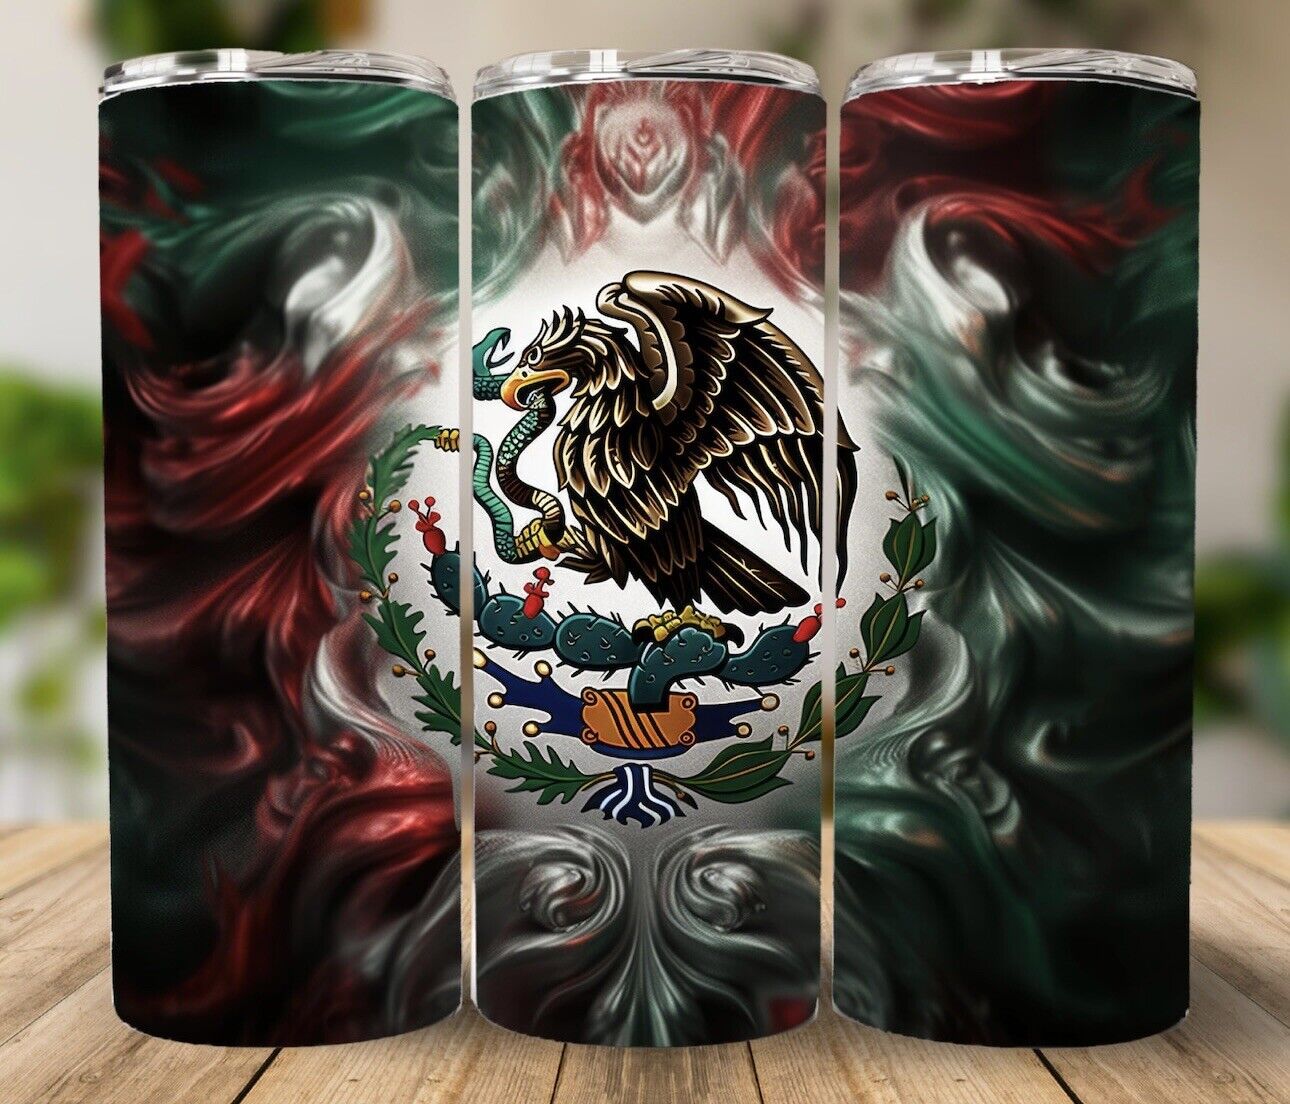 1pc New Stainless Steel 20oz Mexican Patriotic/ Mexican Flag Tumbler SkinnyCup